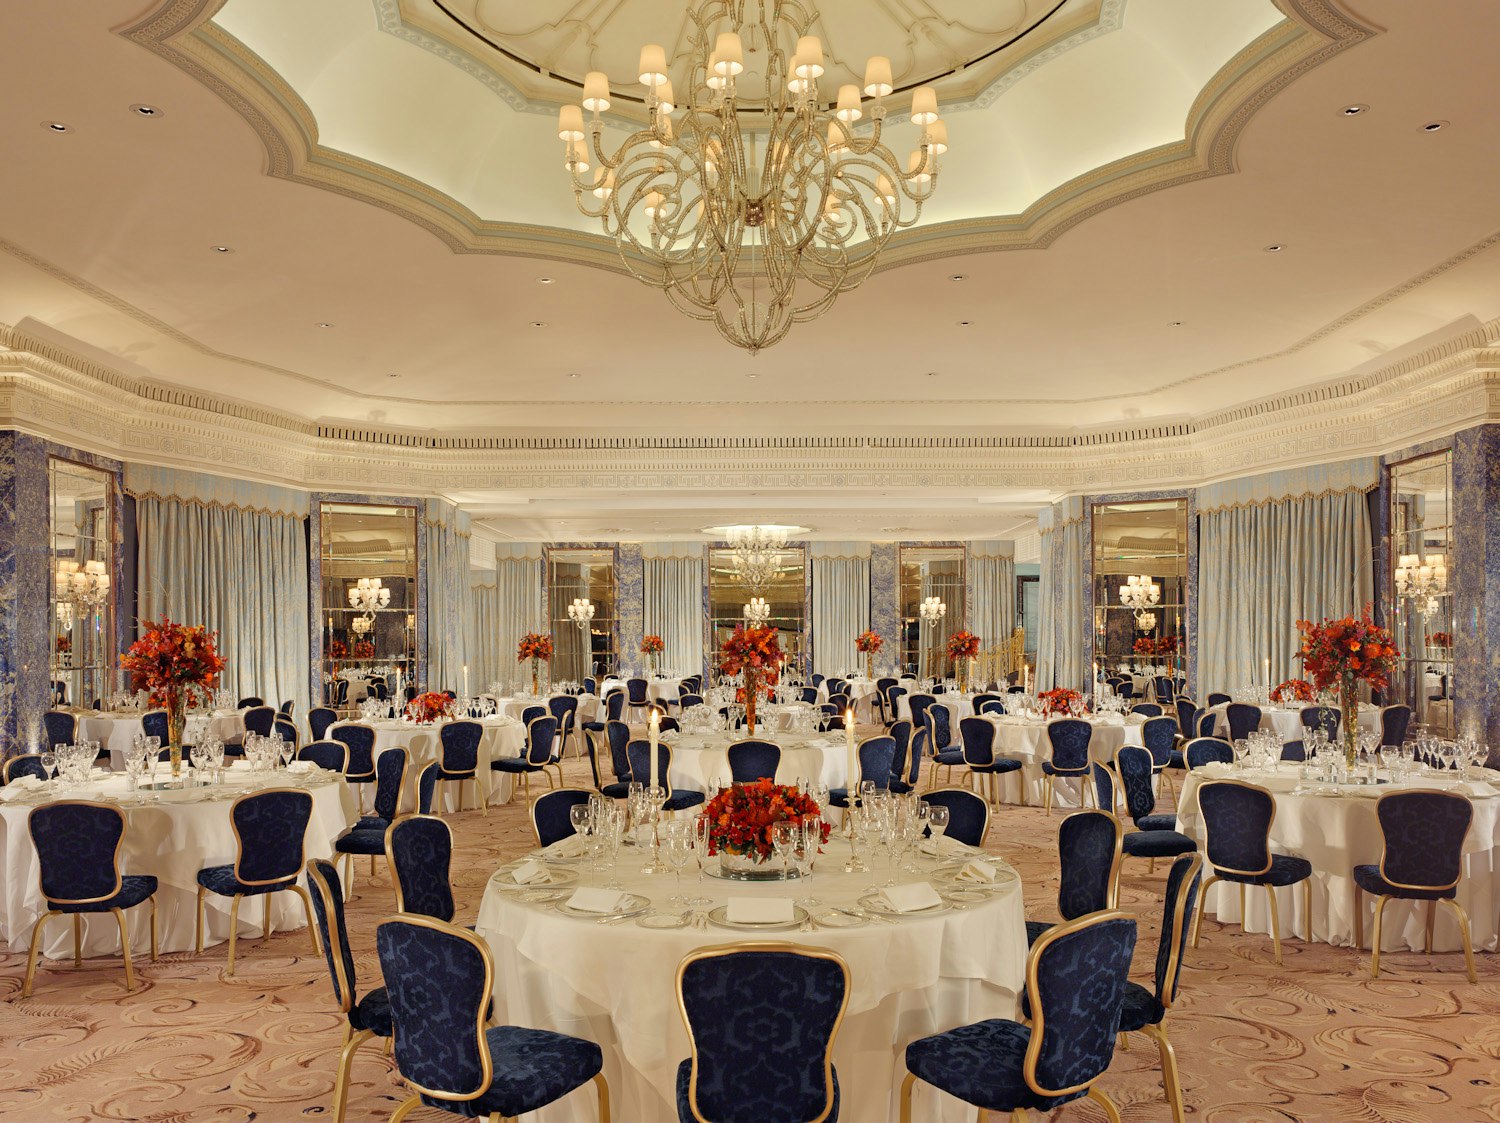 Party Ballrooms Venues in London - The Dorchester